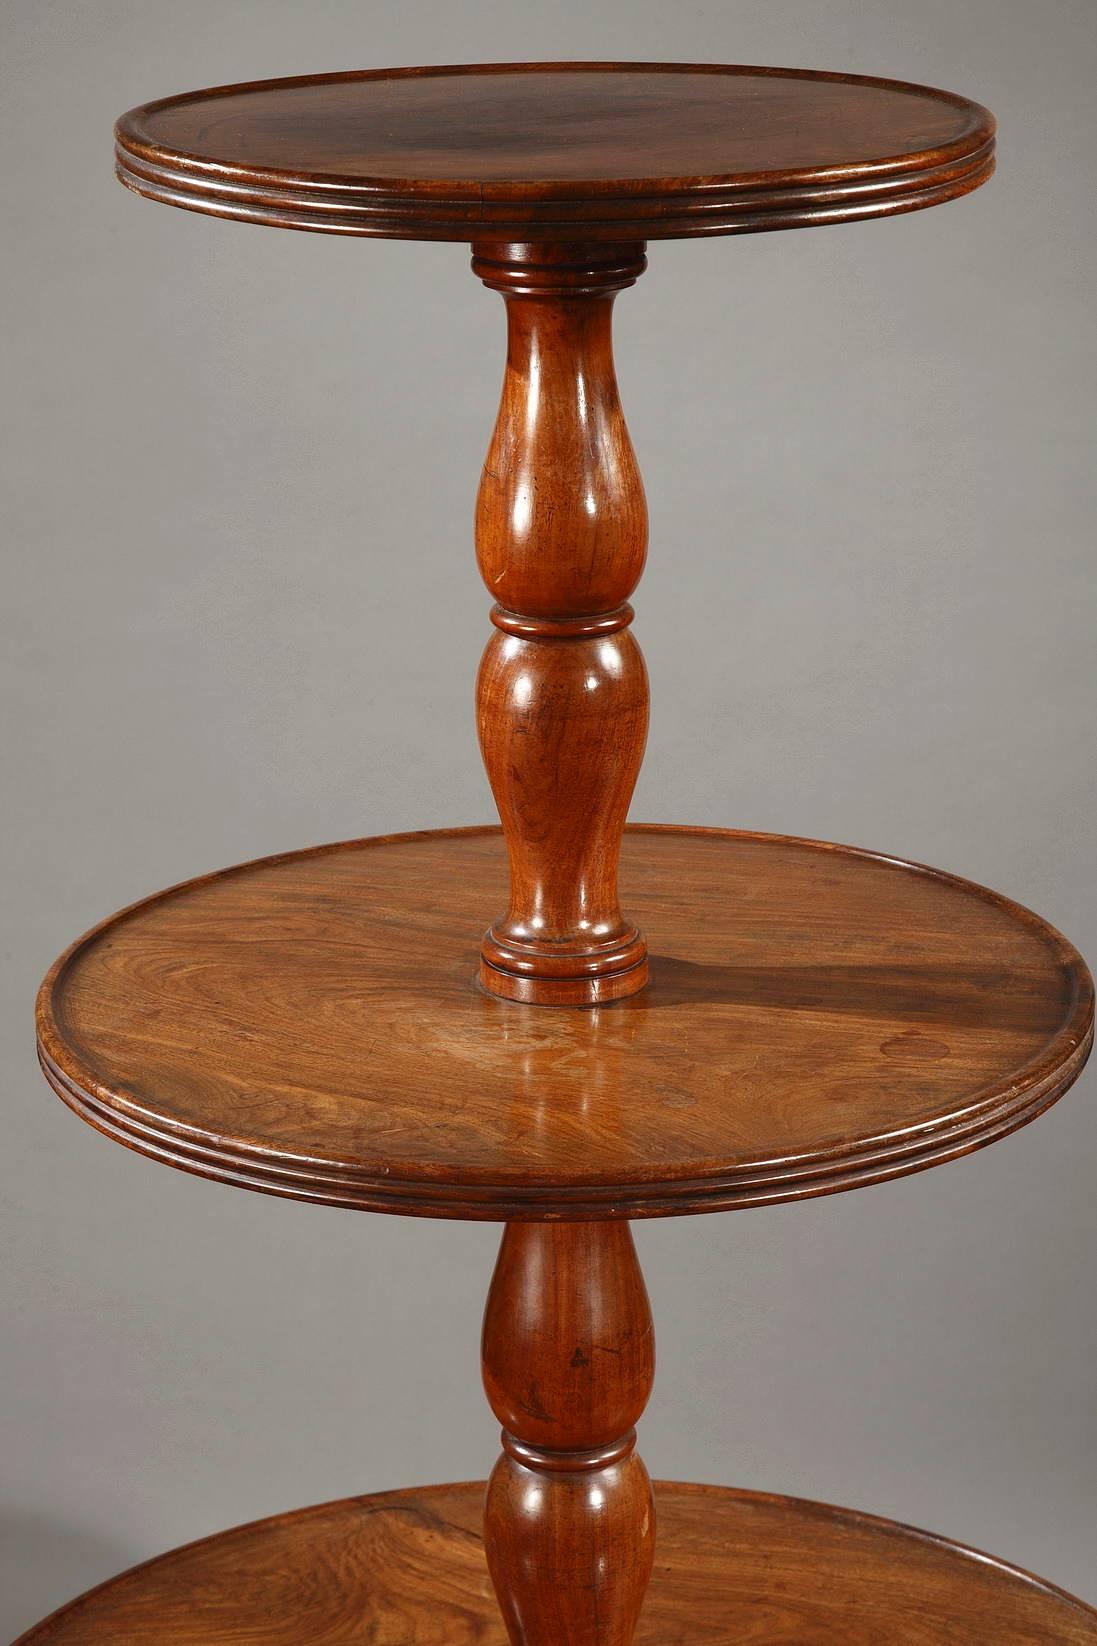 Solid wood, three-tiered dumbwaiter table. The baluster-shaped central shaft is punctuated by three circular levels that are each bordered with a grooved rim. The two lower levels rotate. It is supported by tripod legs that are intricately carved